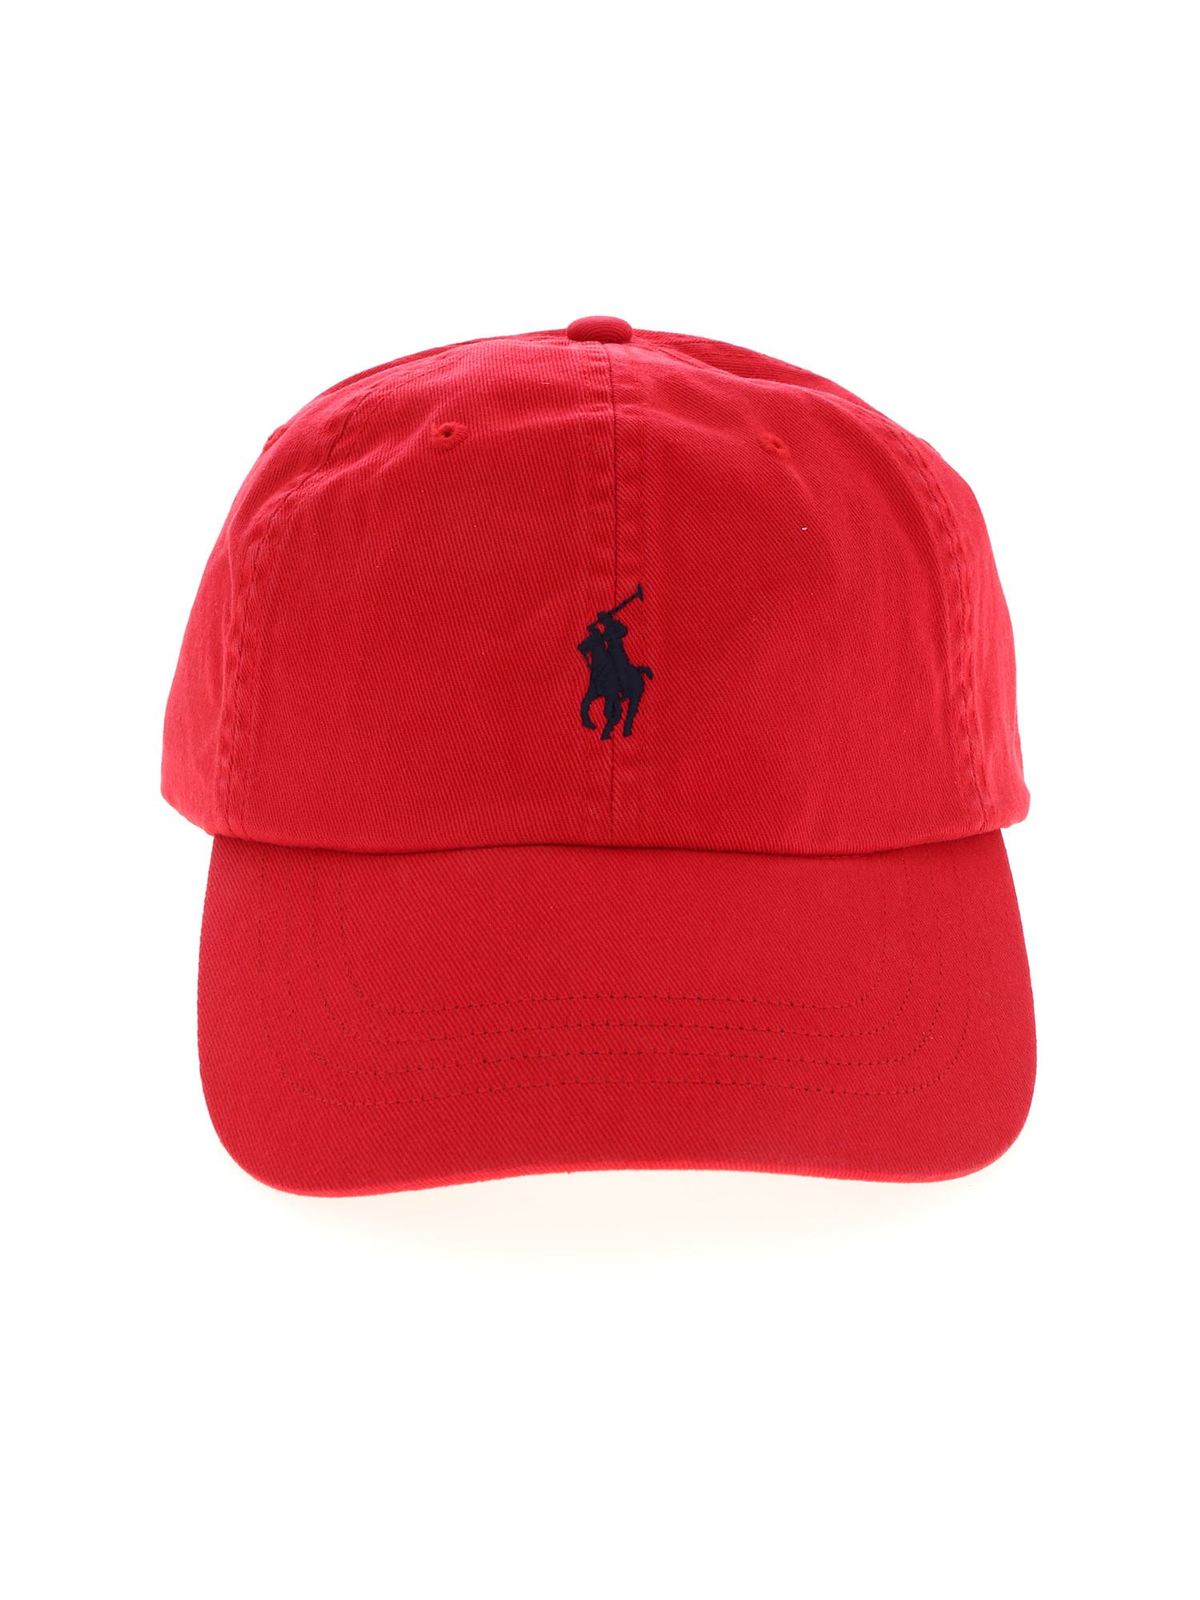 polo red hat